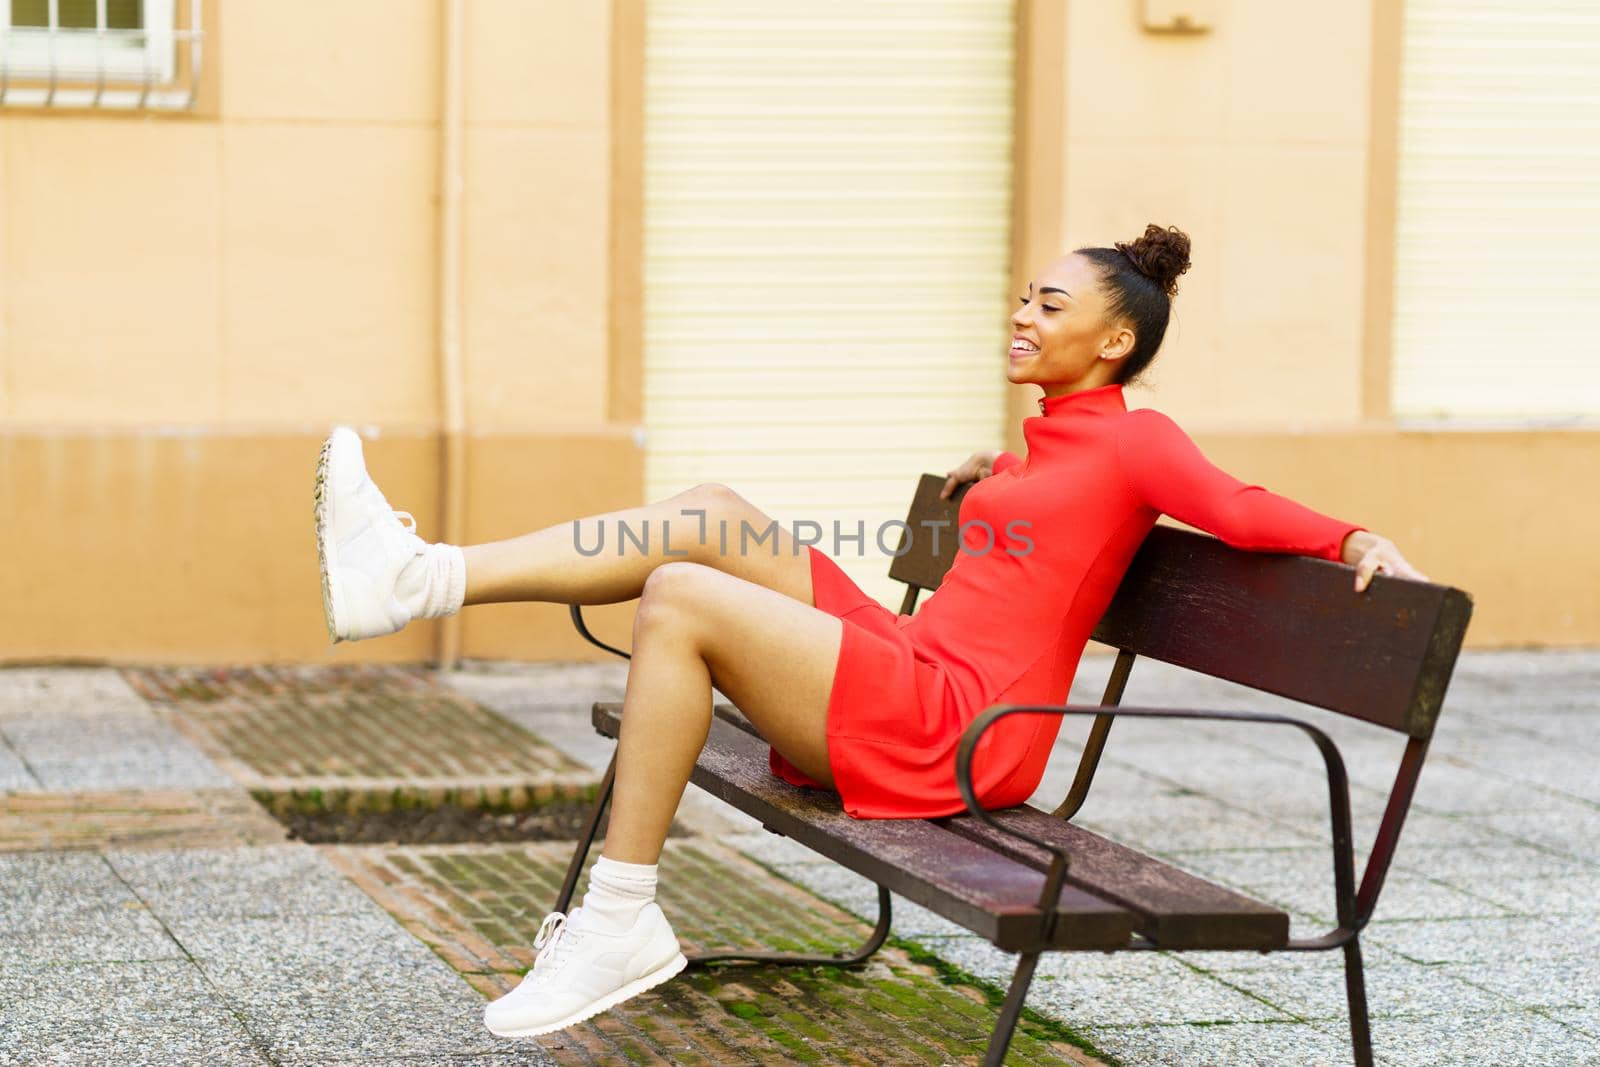 Happy mixed woman, waving her legs in joy, sitting on a bench in the street.